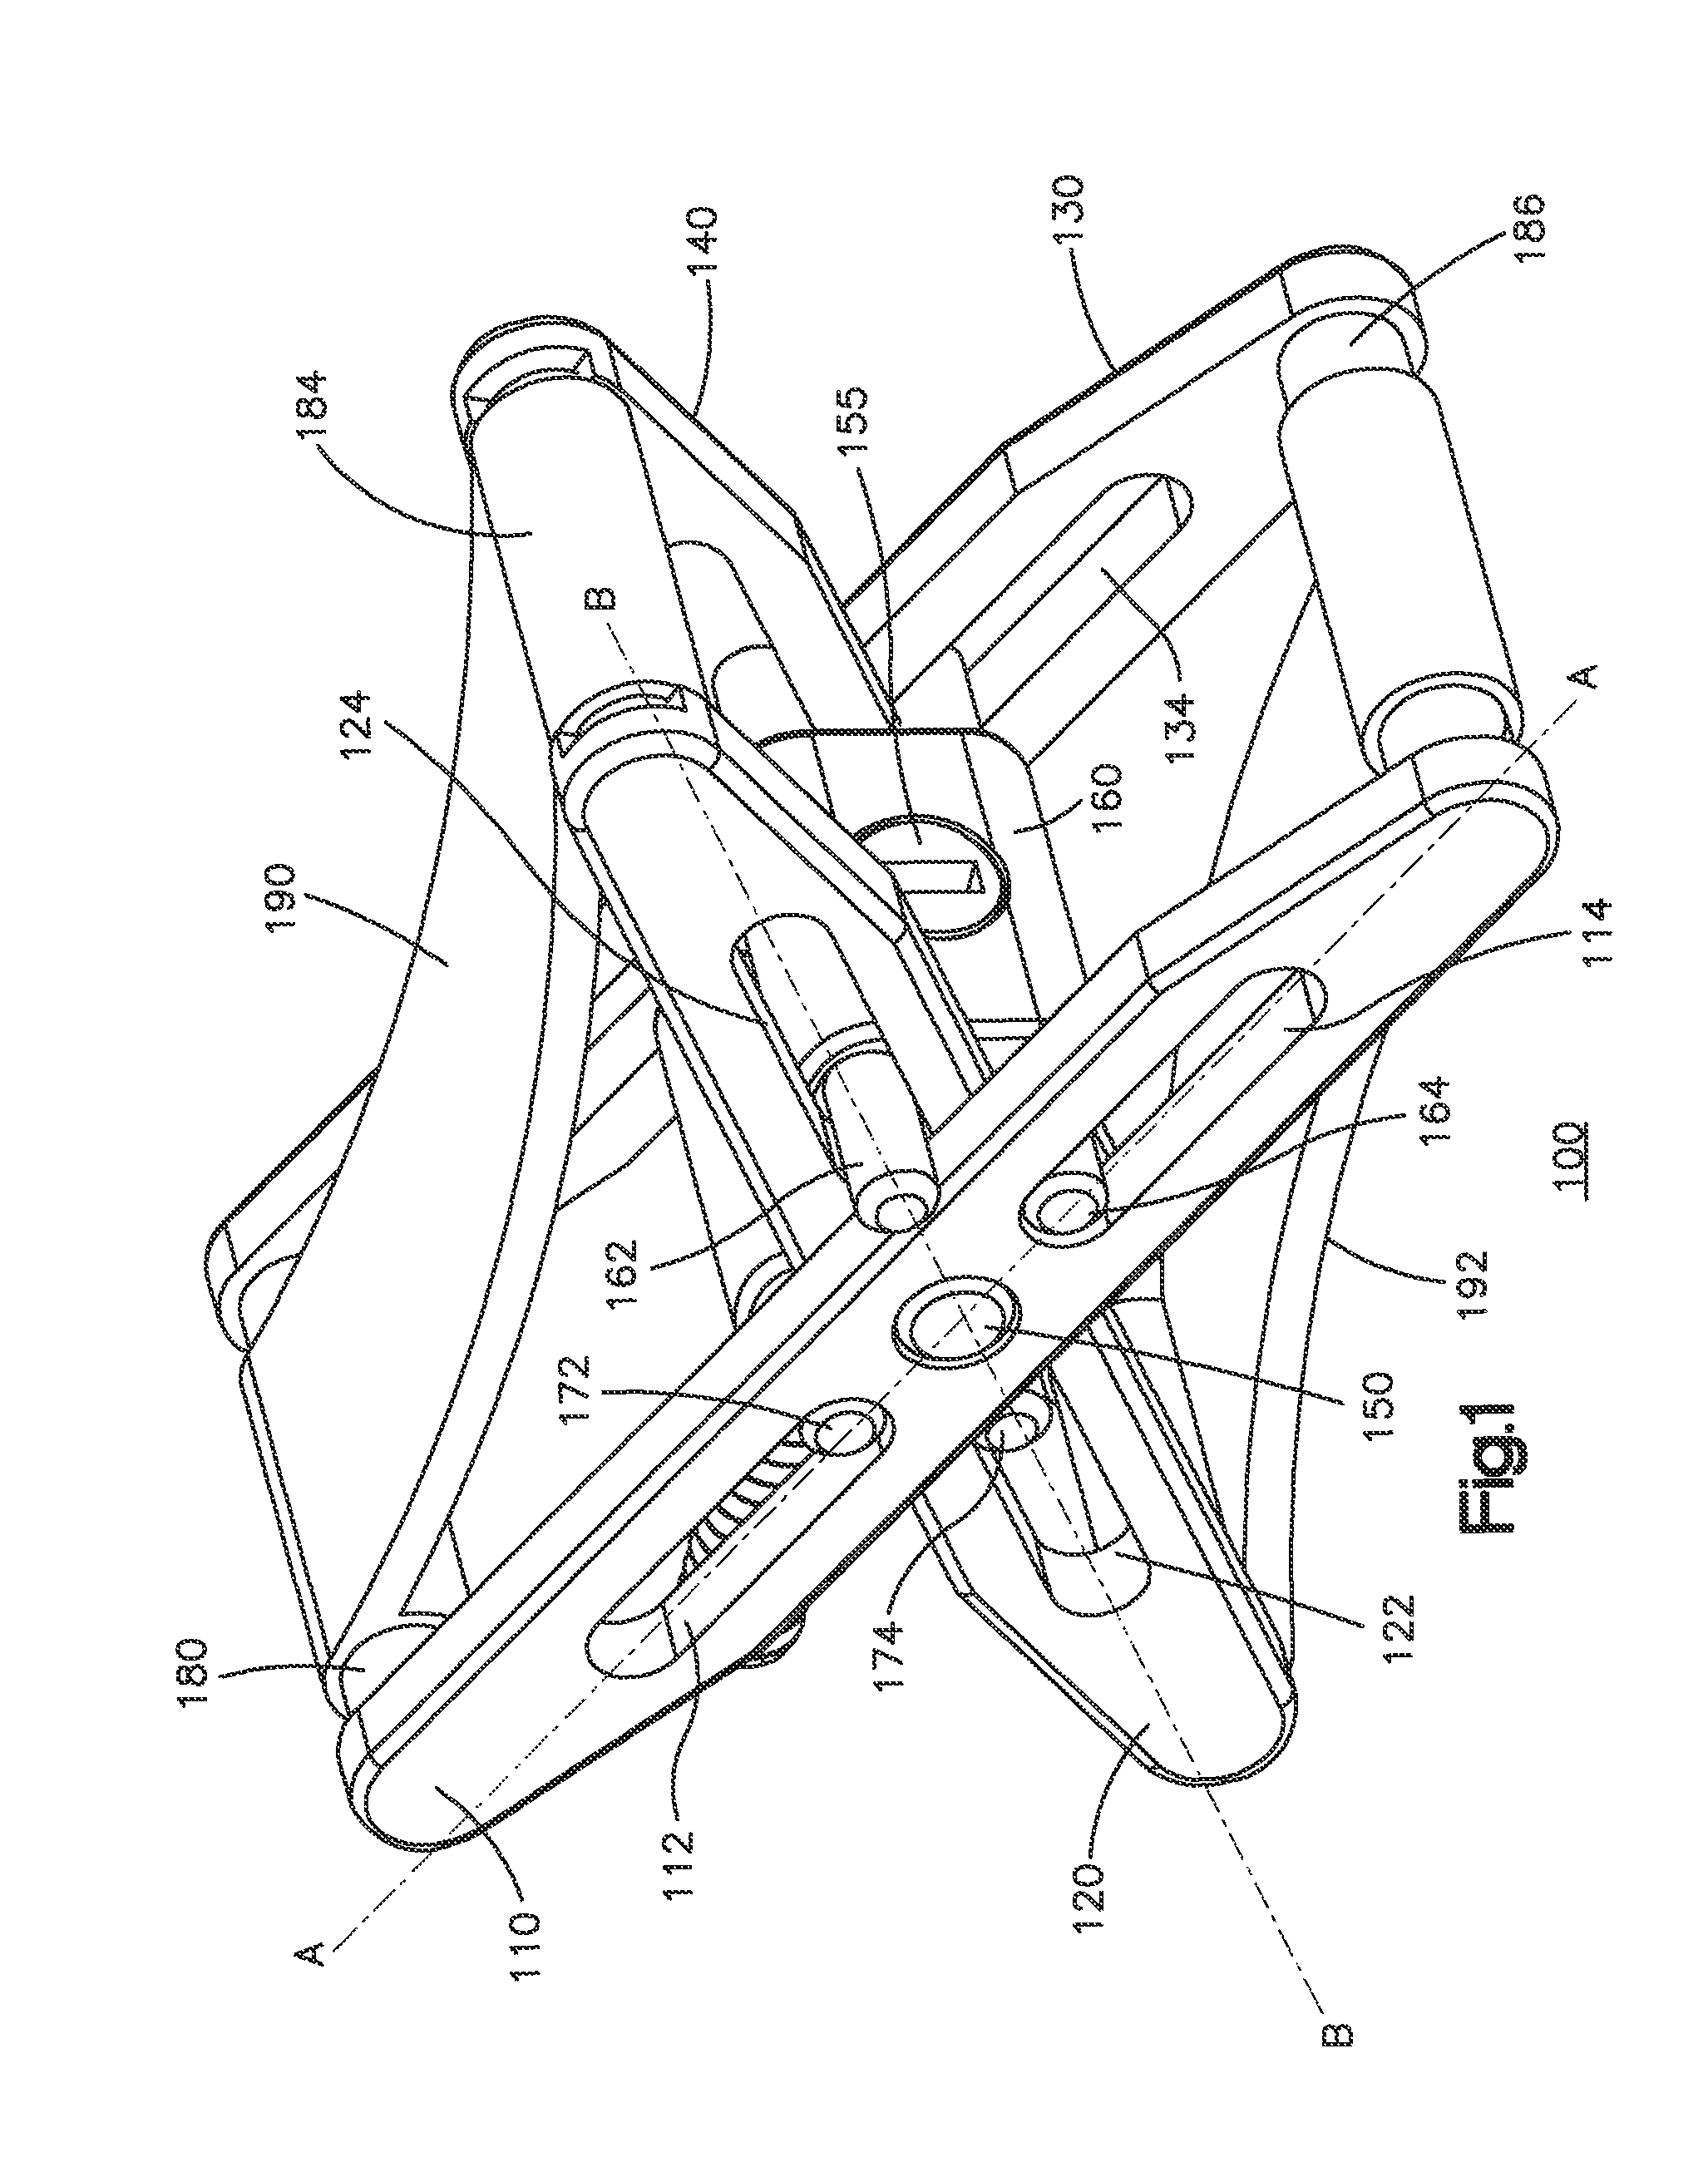 Expandable interspinous process spacer